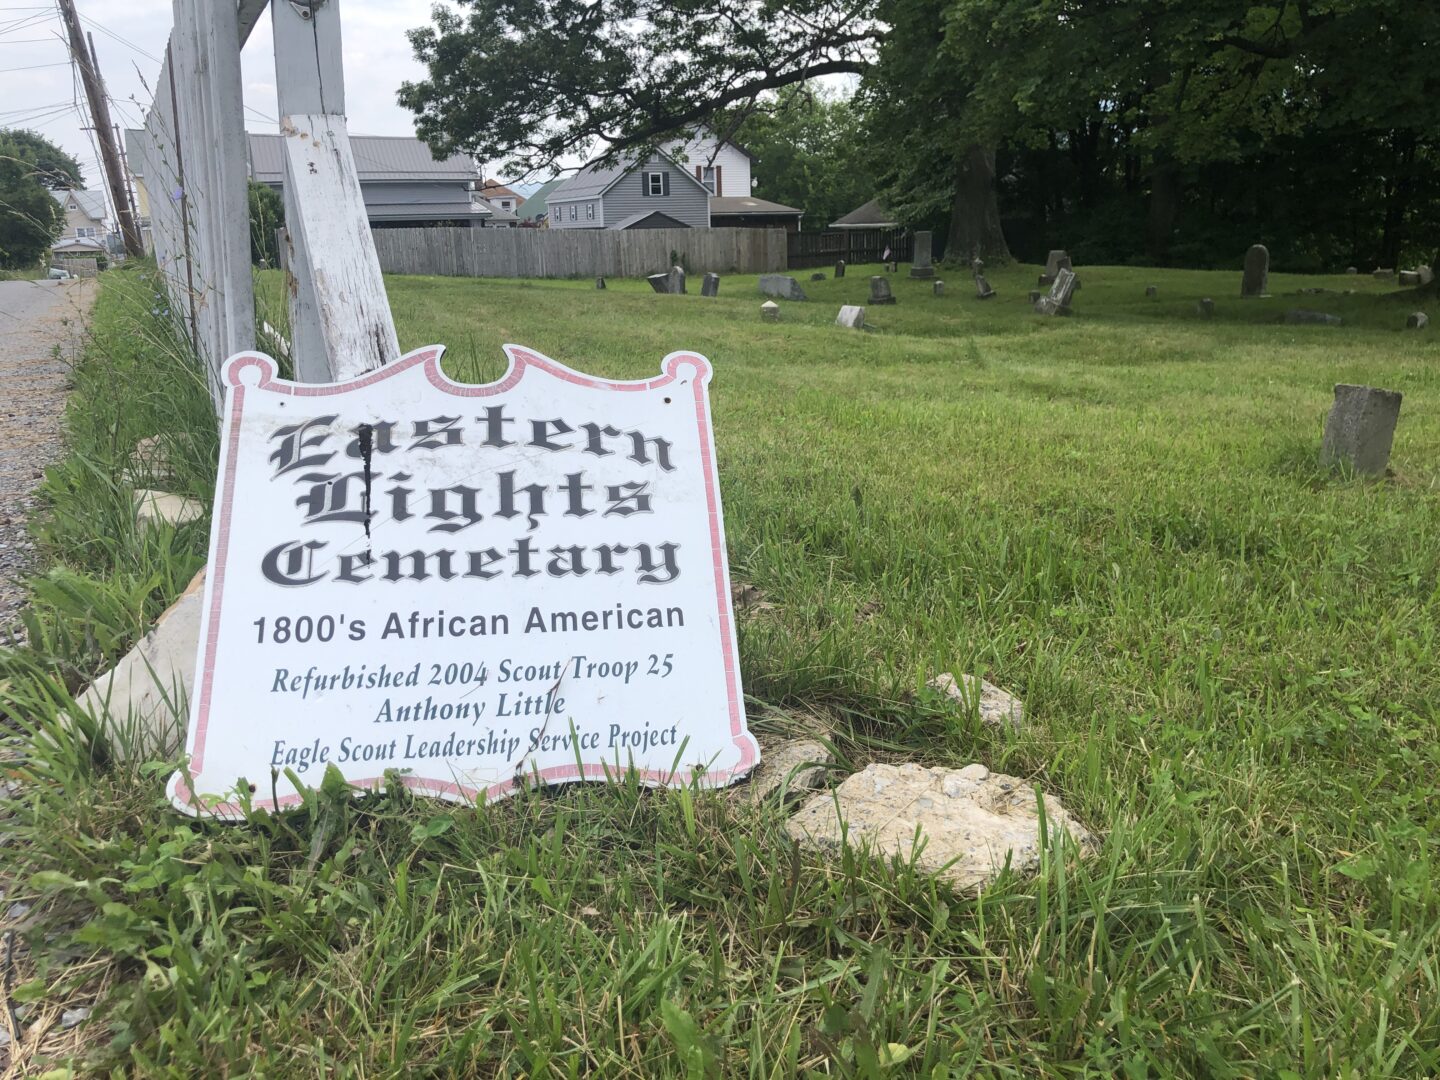 Eastern Light Cemetery in Altoona is getting $2,000 for preservation work.
